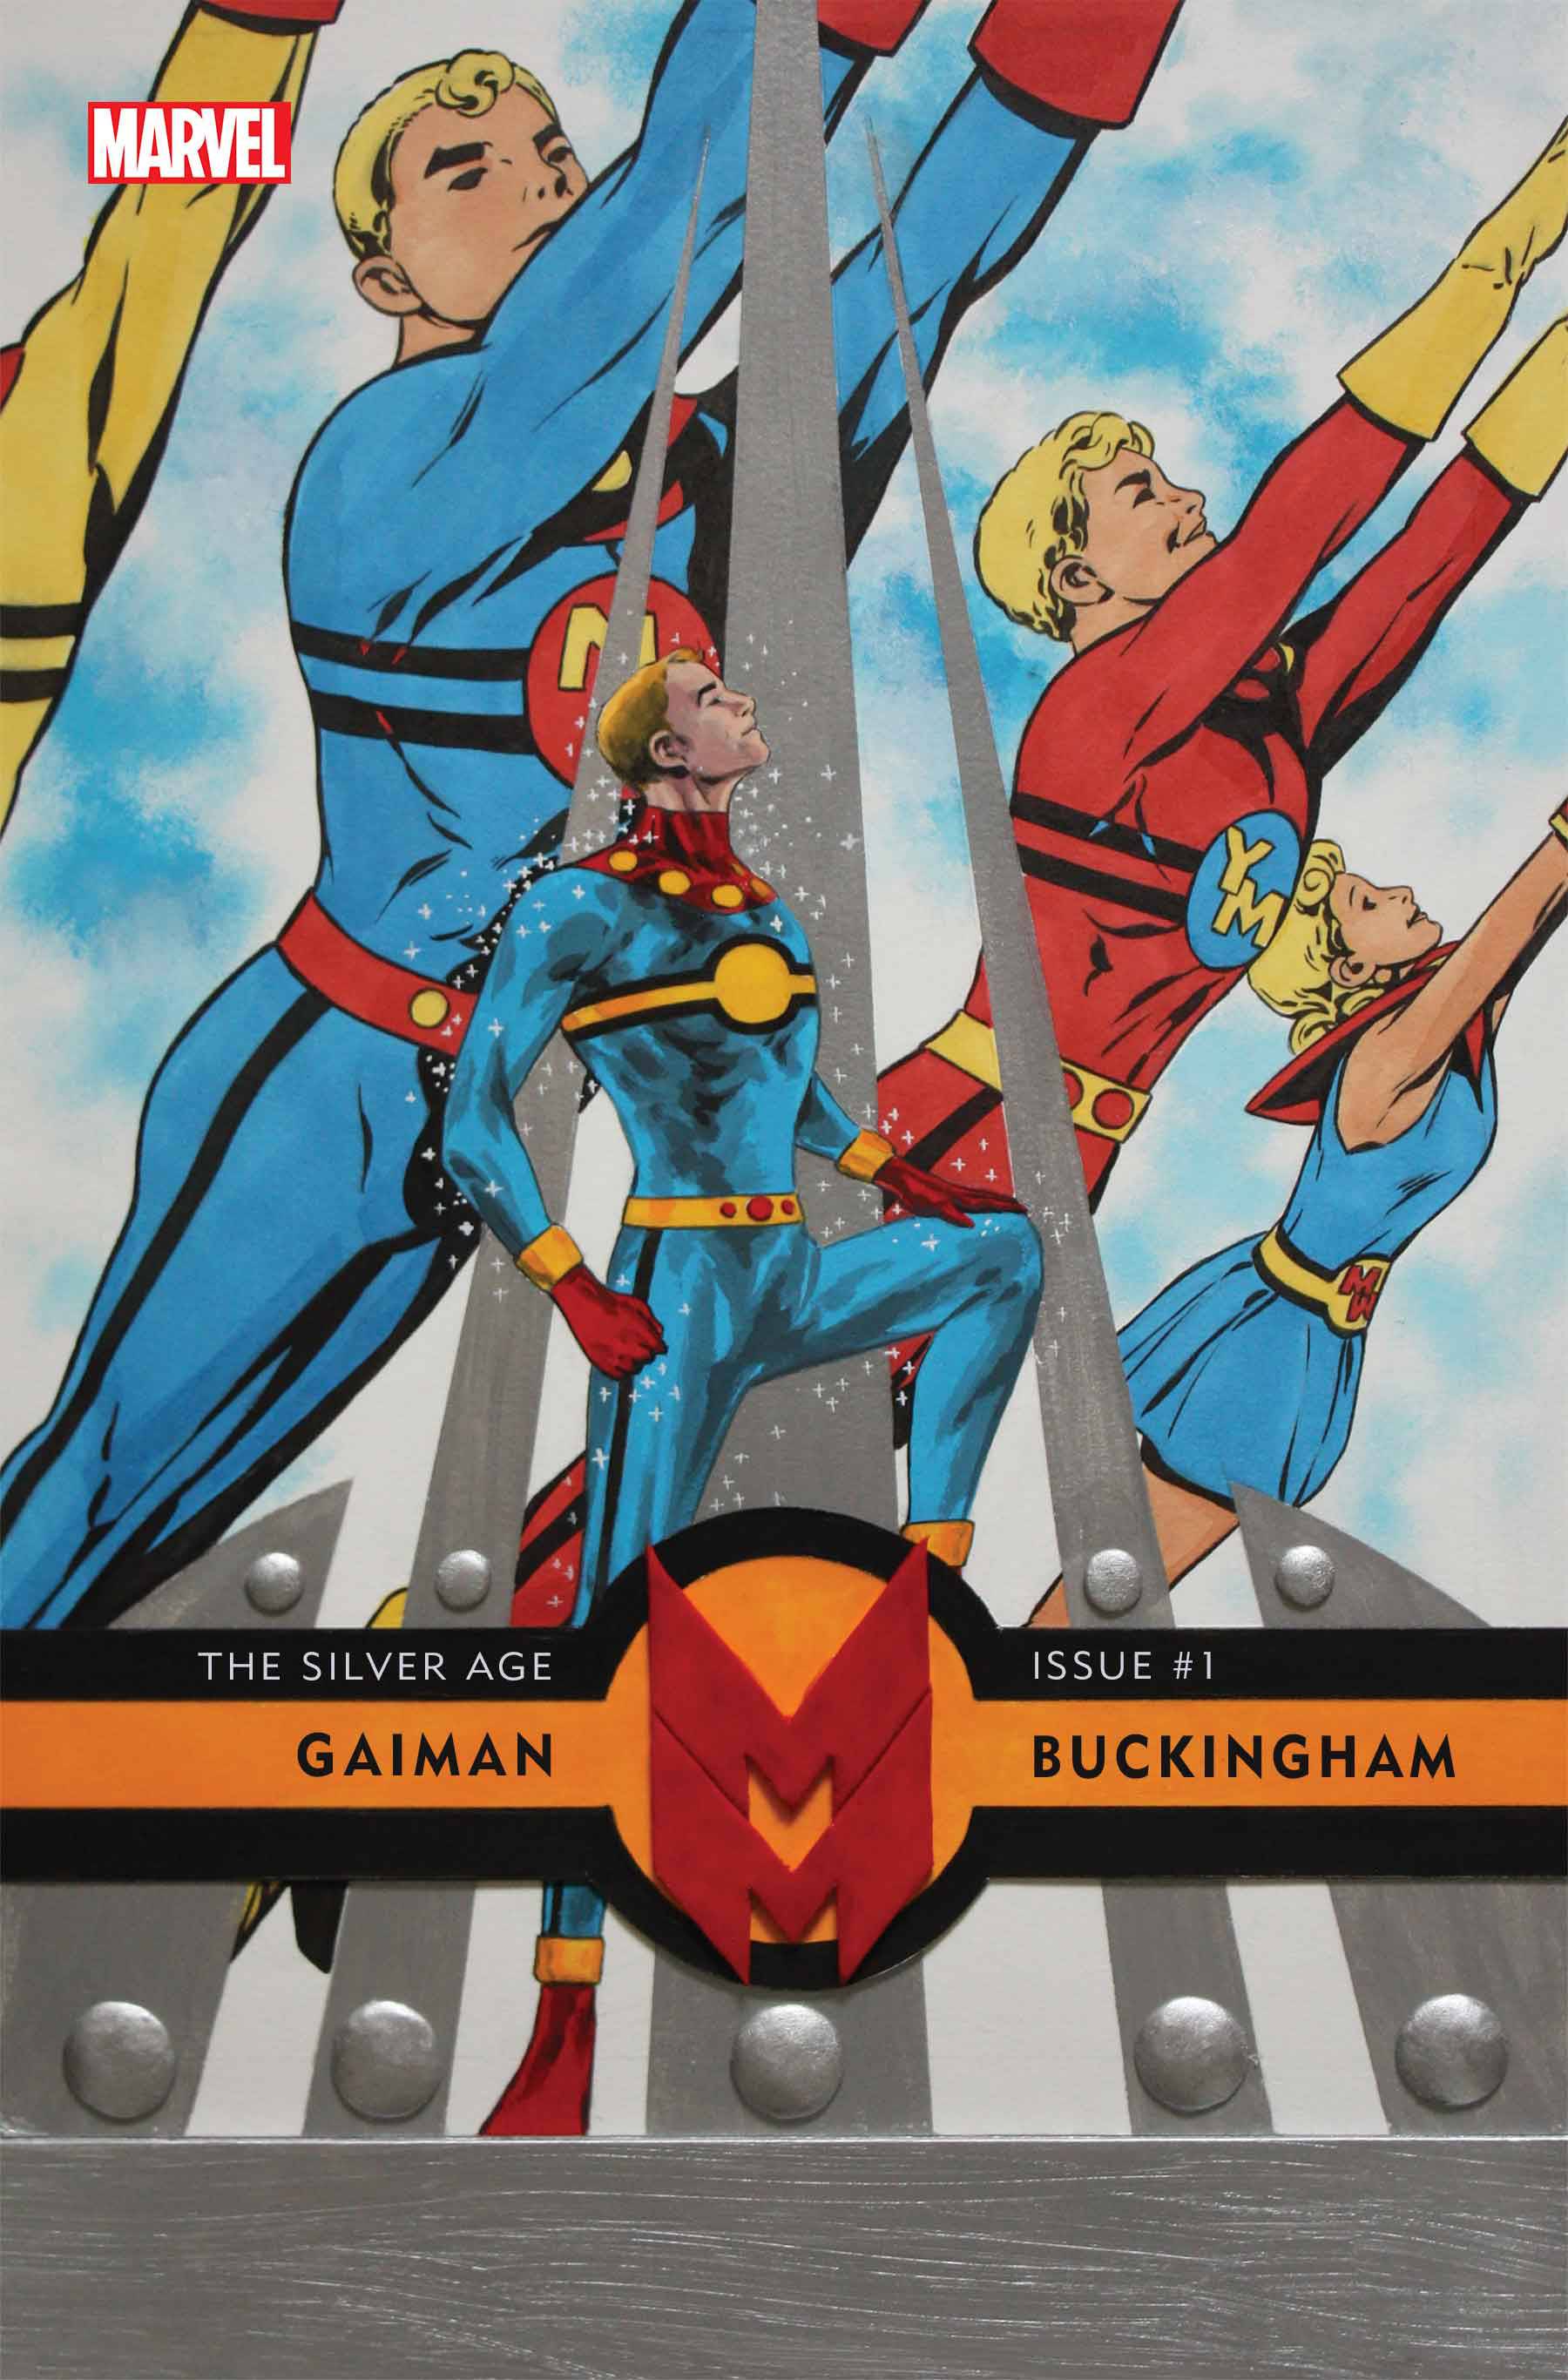 MIRACLEMAN SILVER AGE #1 BUCKINGHAM POSTER